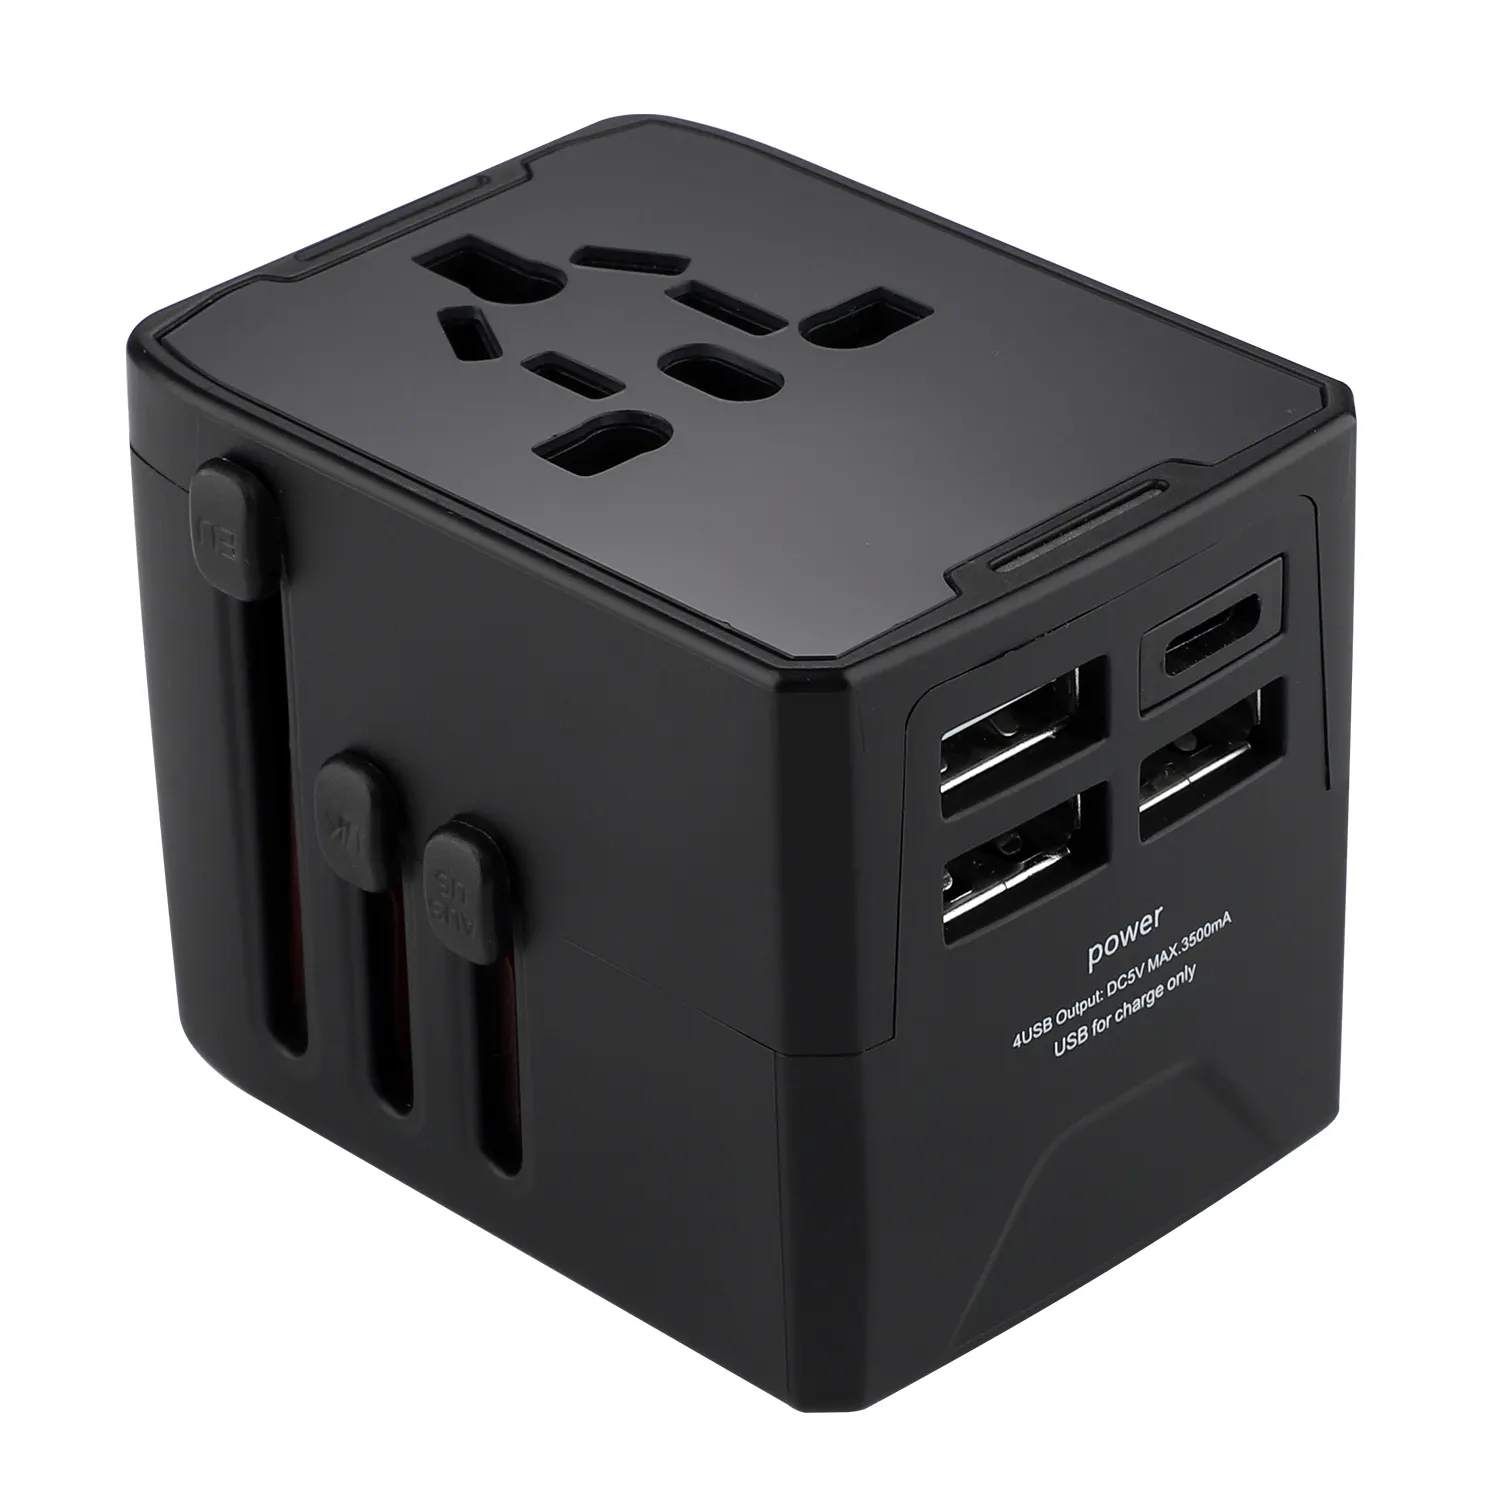 Universal Travel Charger Worldwide Voltage Compatible US UK EU AU with 3 USB 1 Type C Universal Travel Adapter